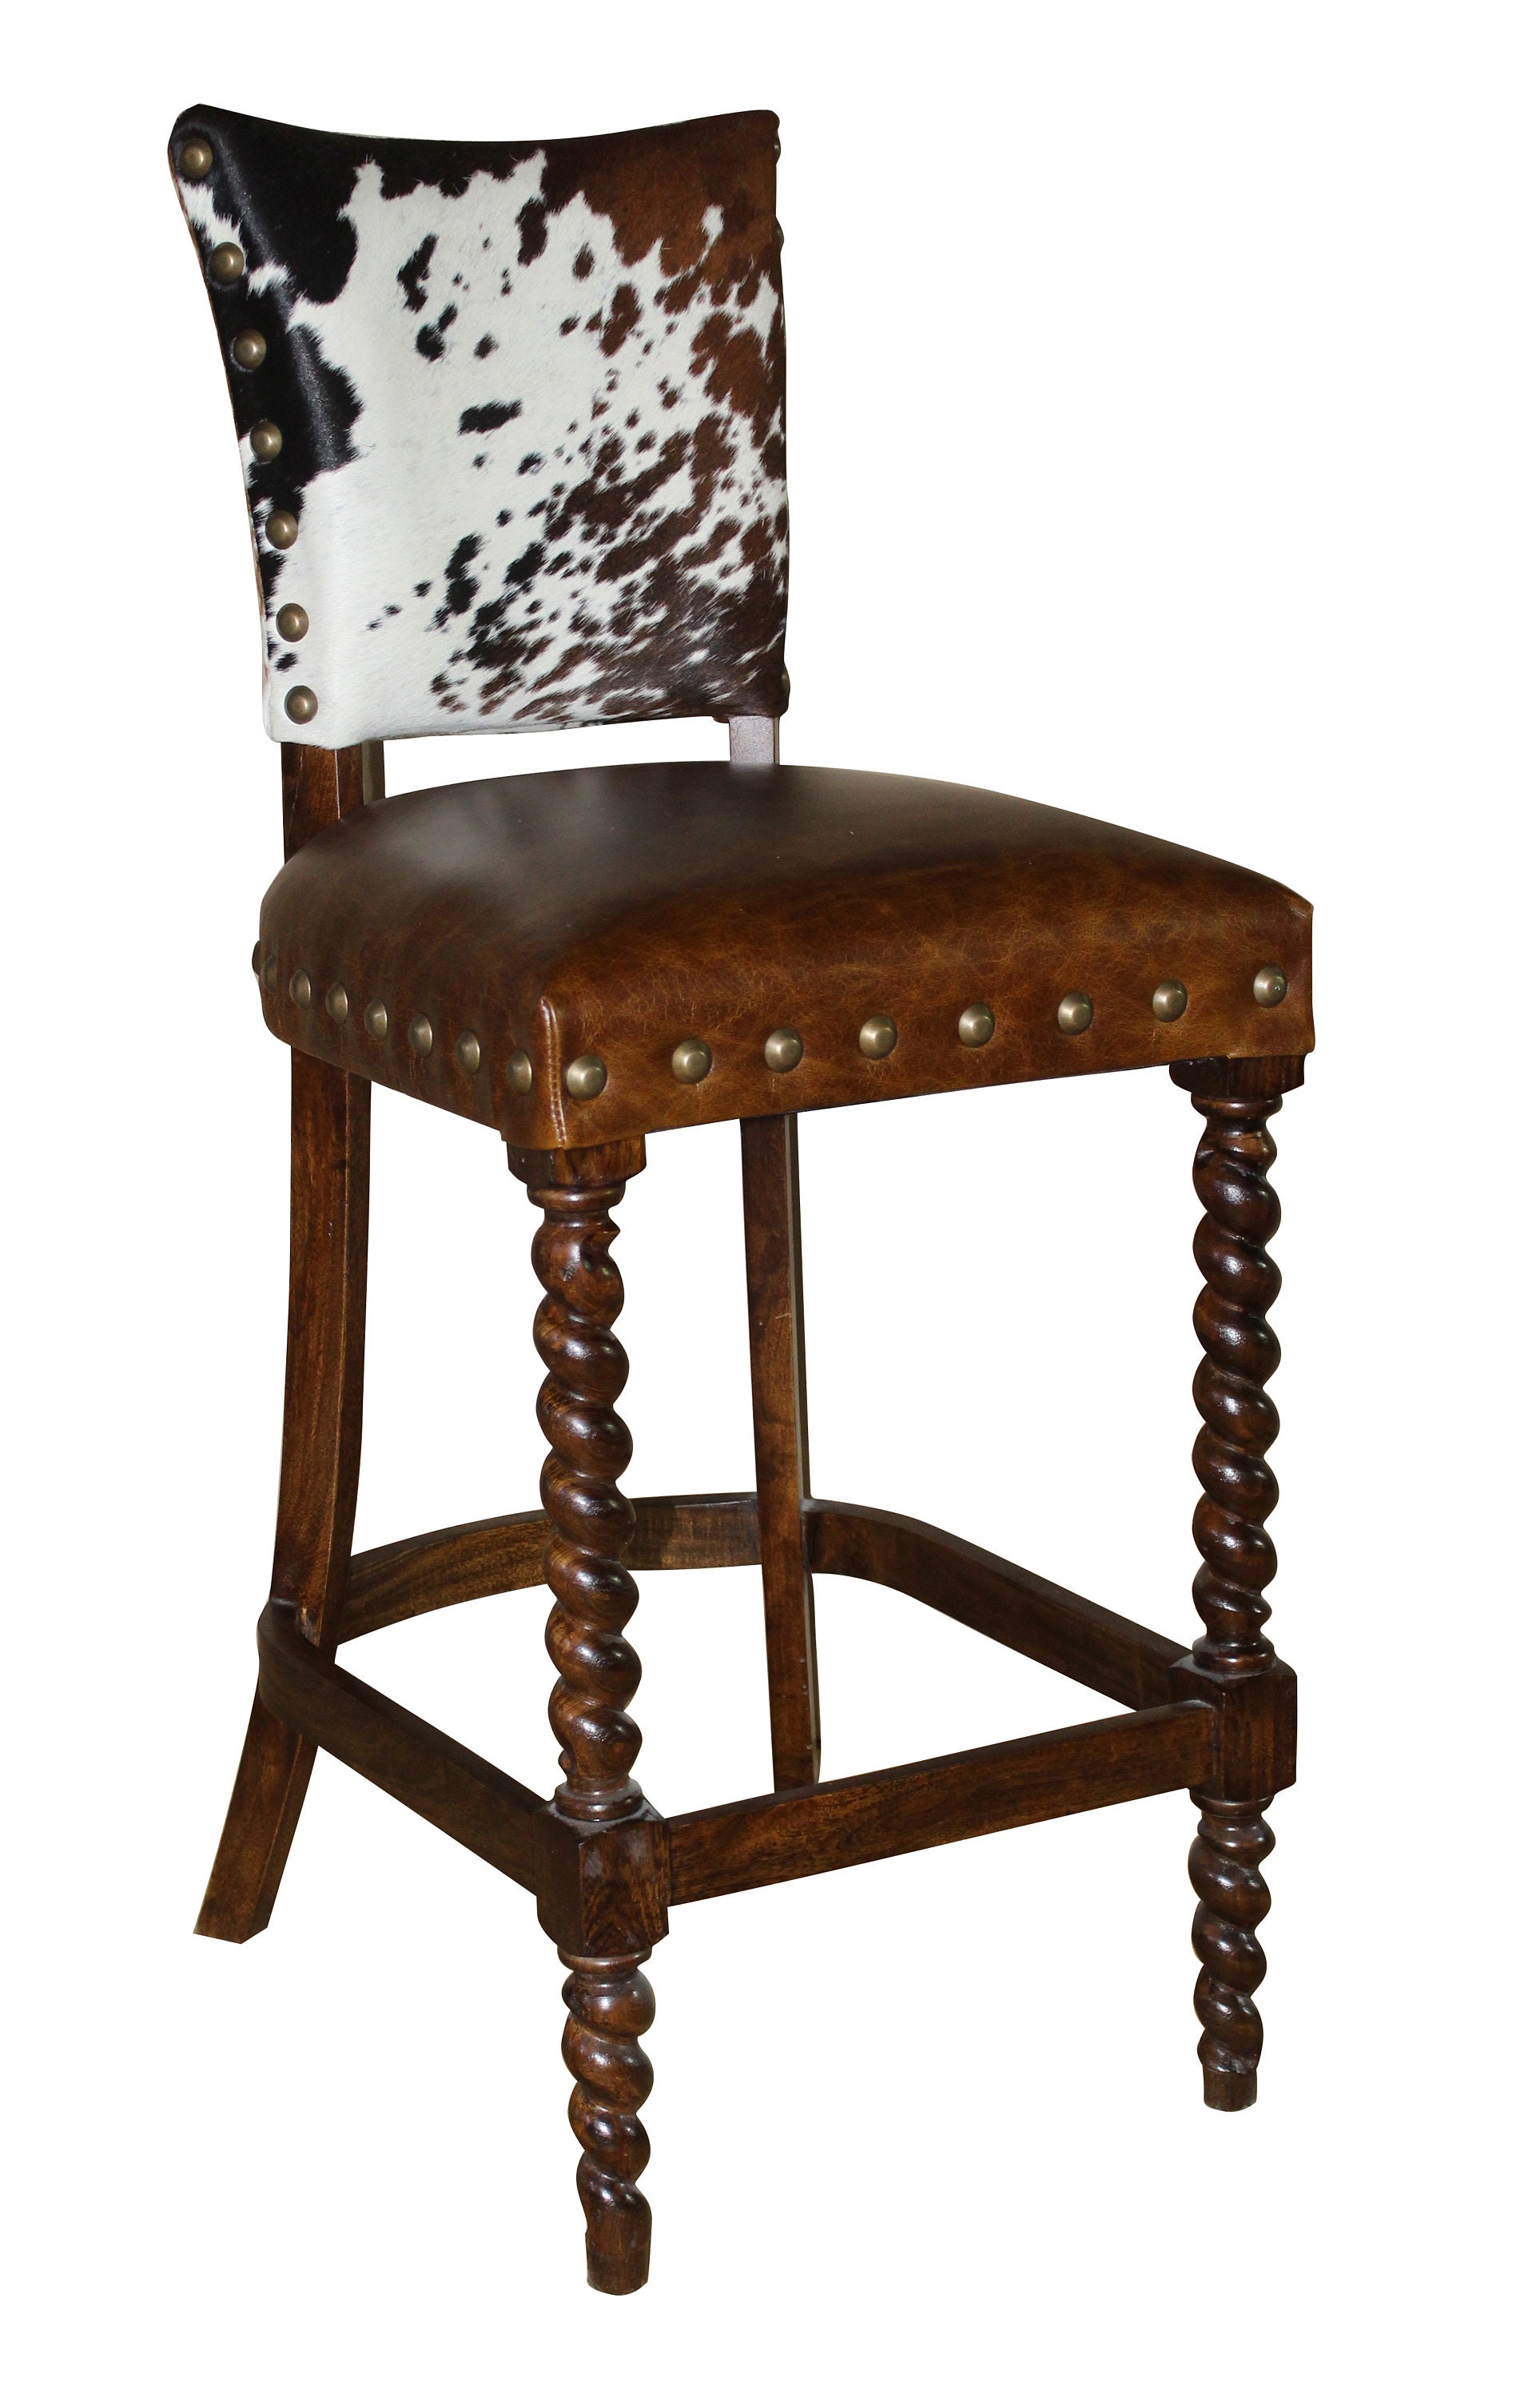 Barley Twist Cowhide Bar Stool - Camel Color Leather Seat - 4 Seat Minimum Required!